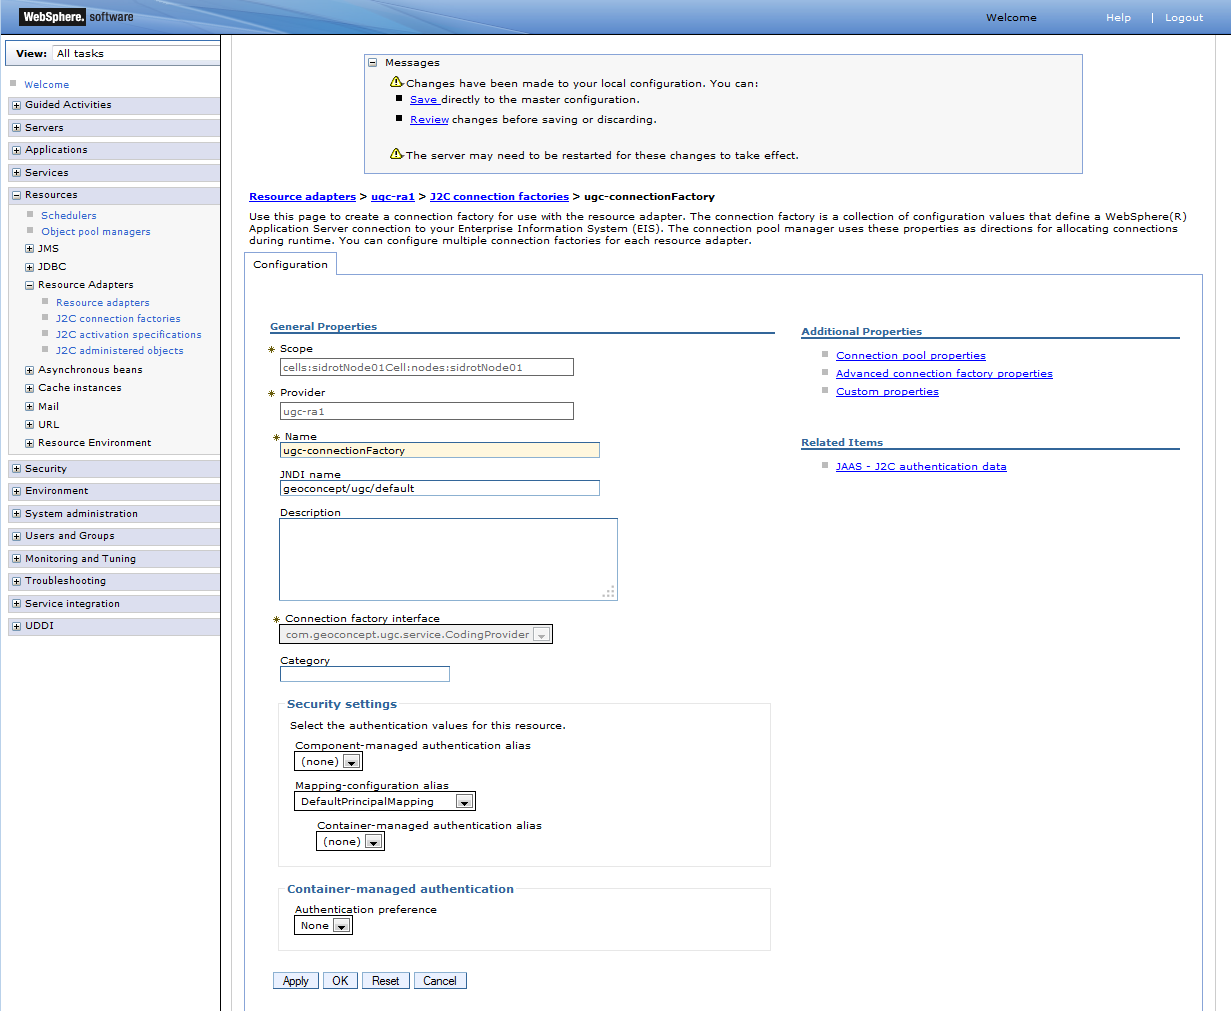 gcweb-reference-img/guides-installation/ugc-websphere-properties.png